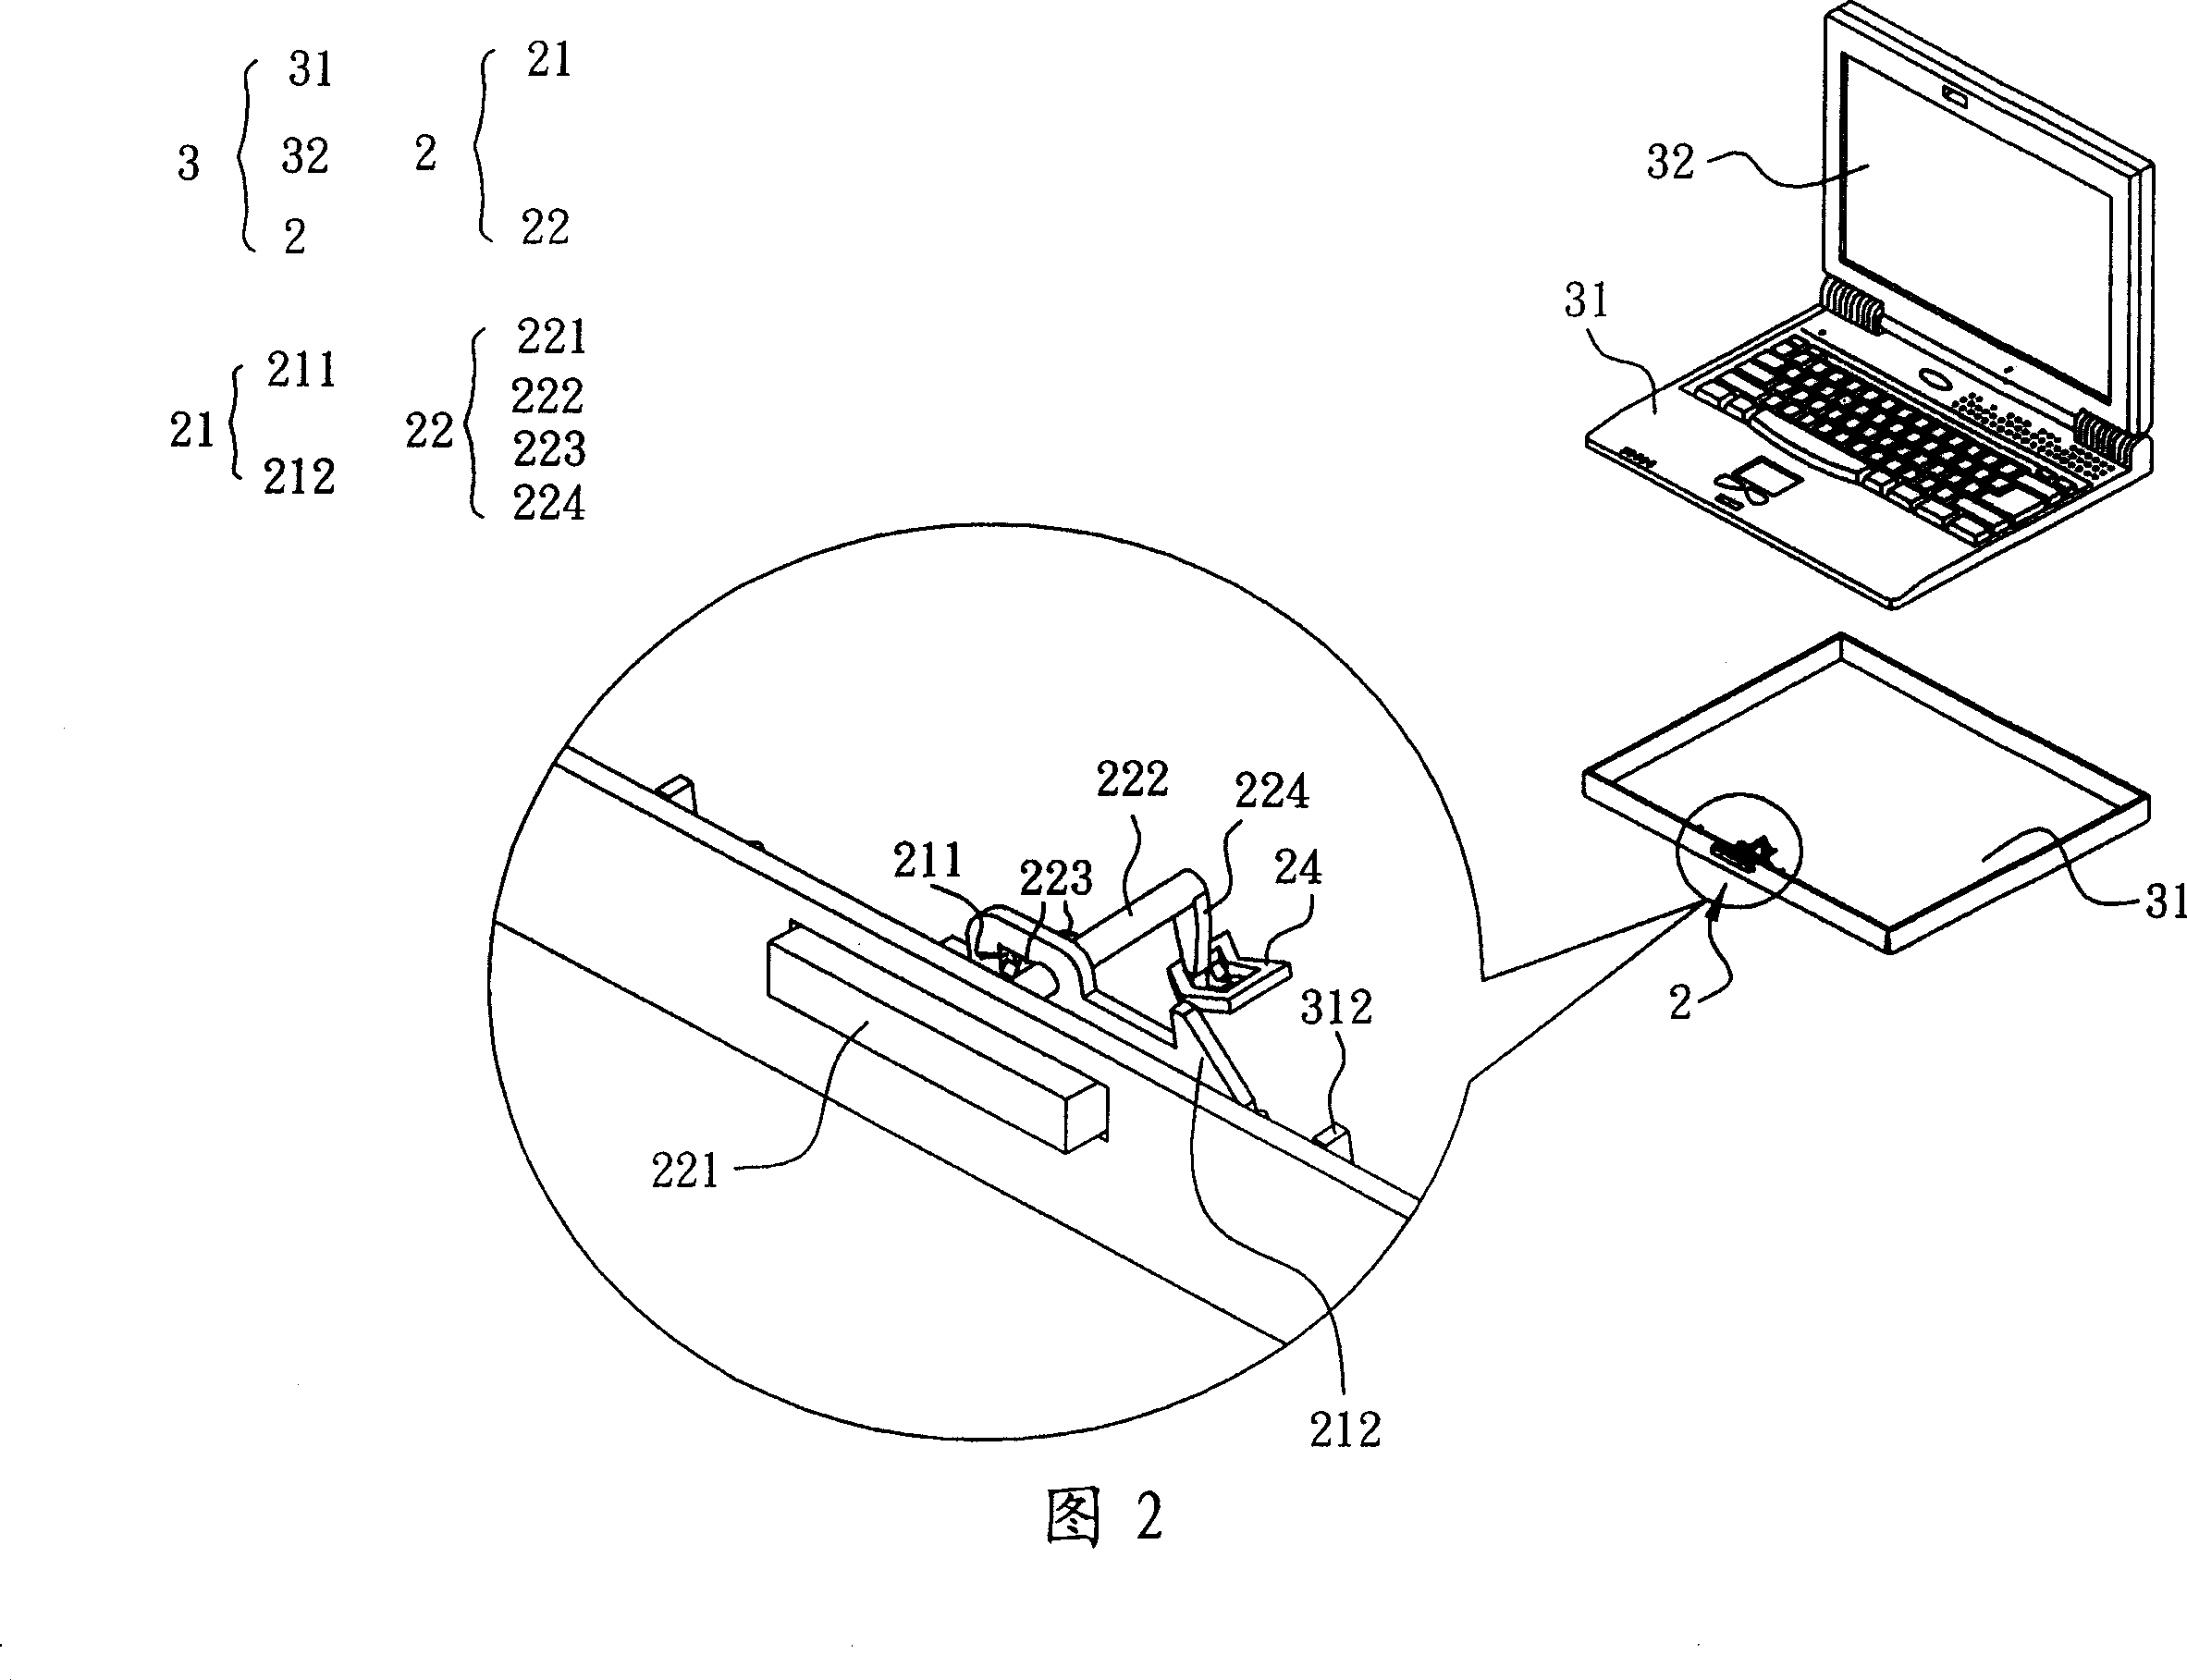 Electronic device and its fastener linking structure